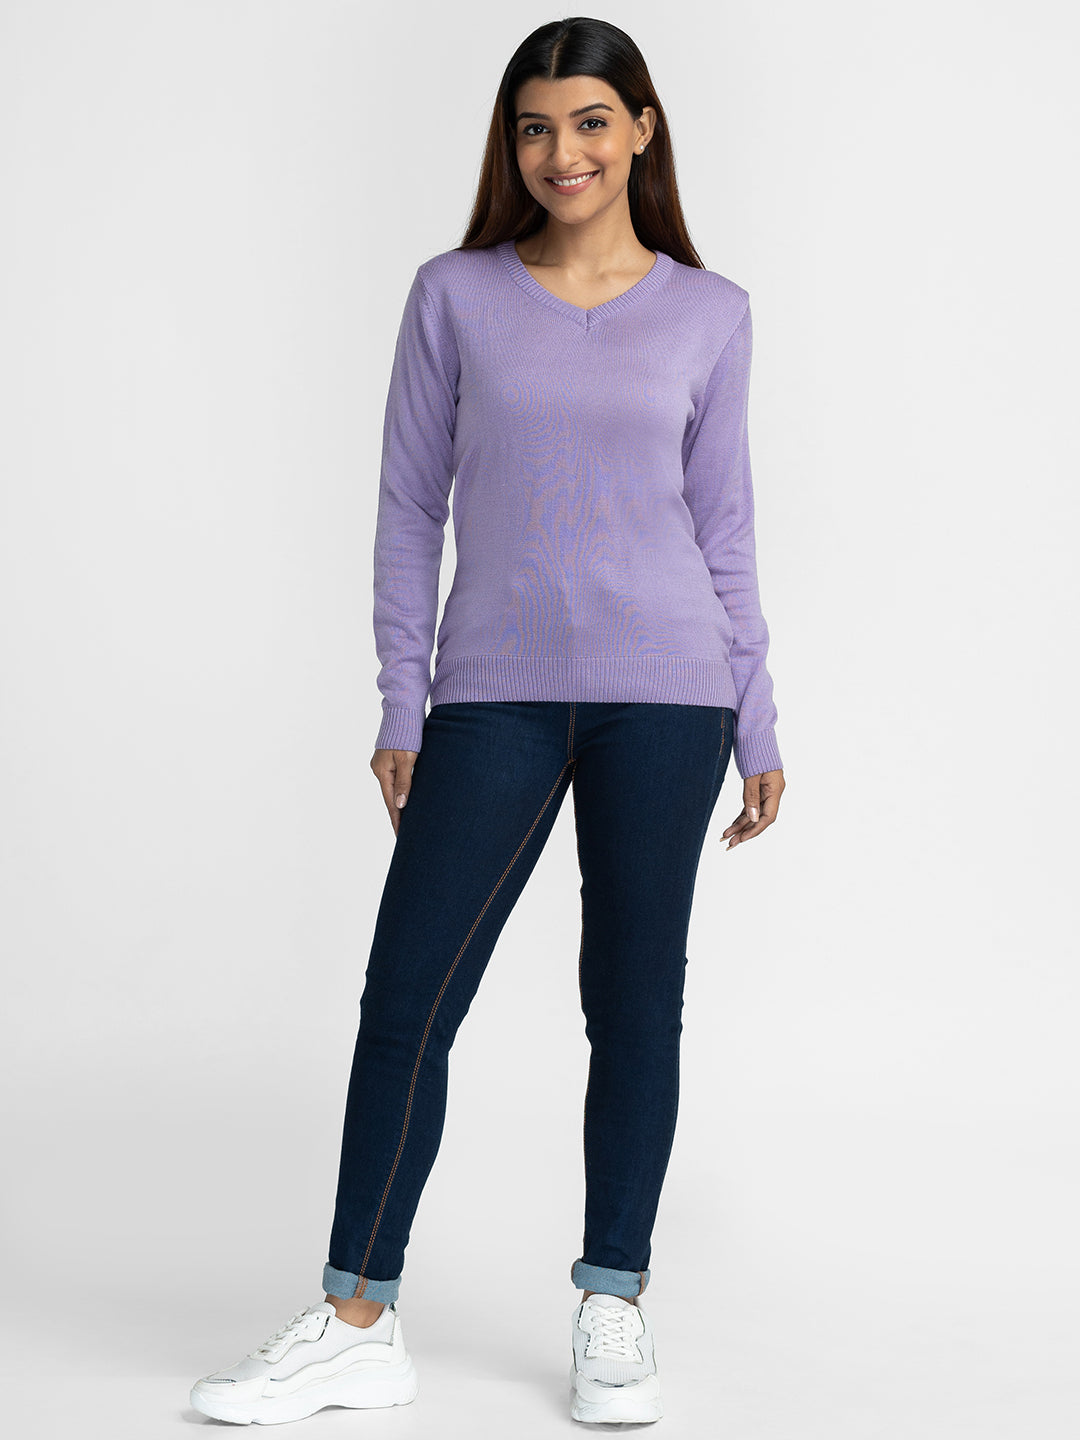 Globus Lavender Solid Pullover Sweater